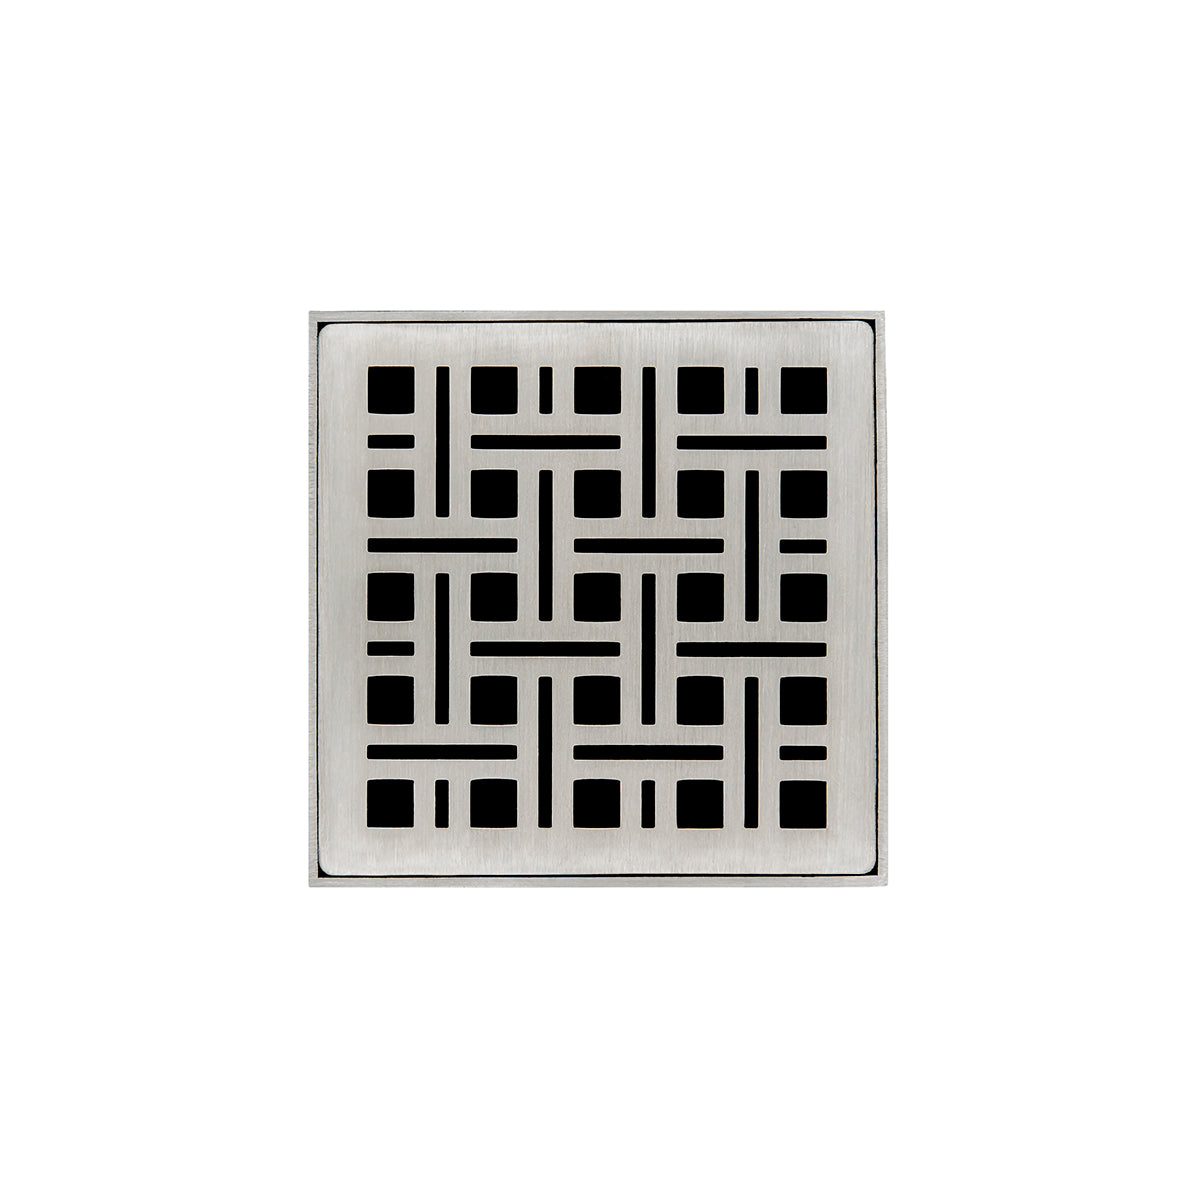 Infinity Drain 4" x 4" VD 4 Premium Center Drain Kit with Weave Pattern Decorative Plate with Cast Iron Drain Body, 2" Outlet